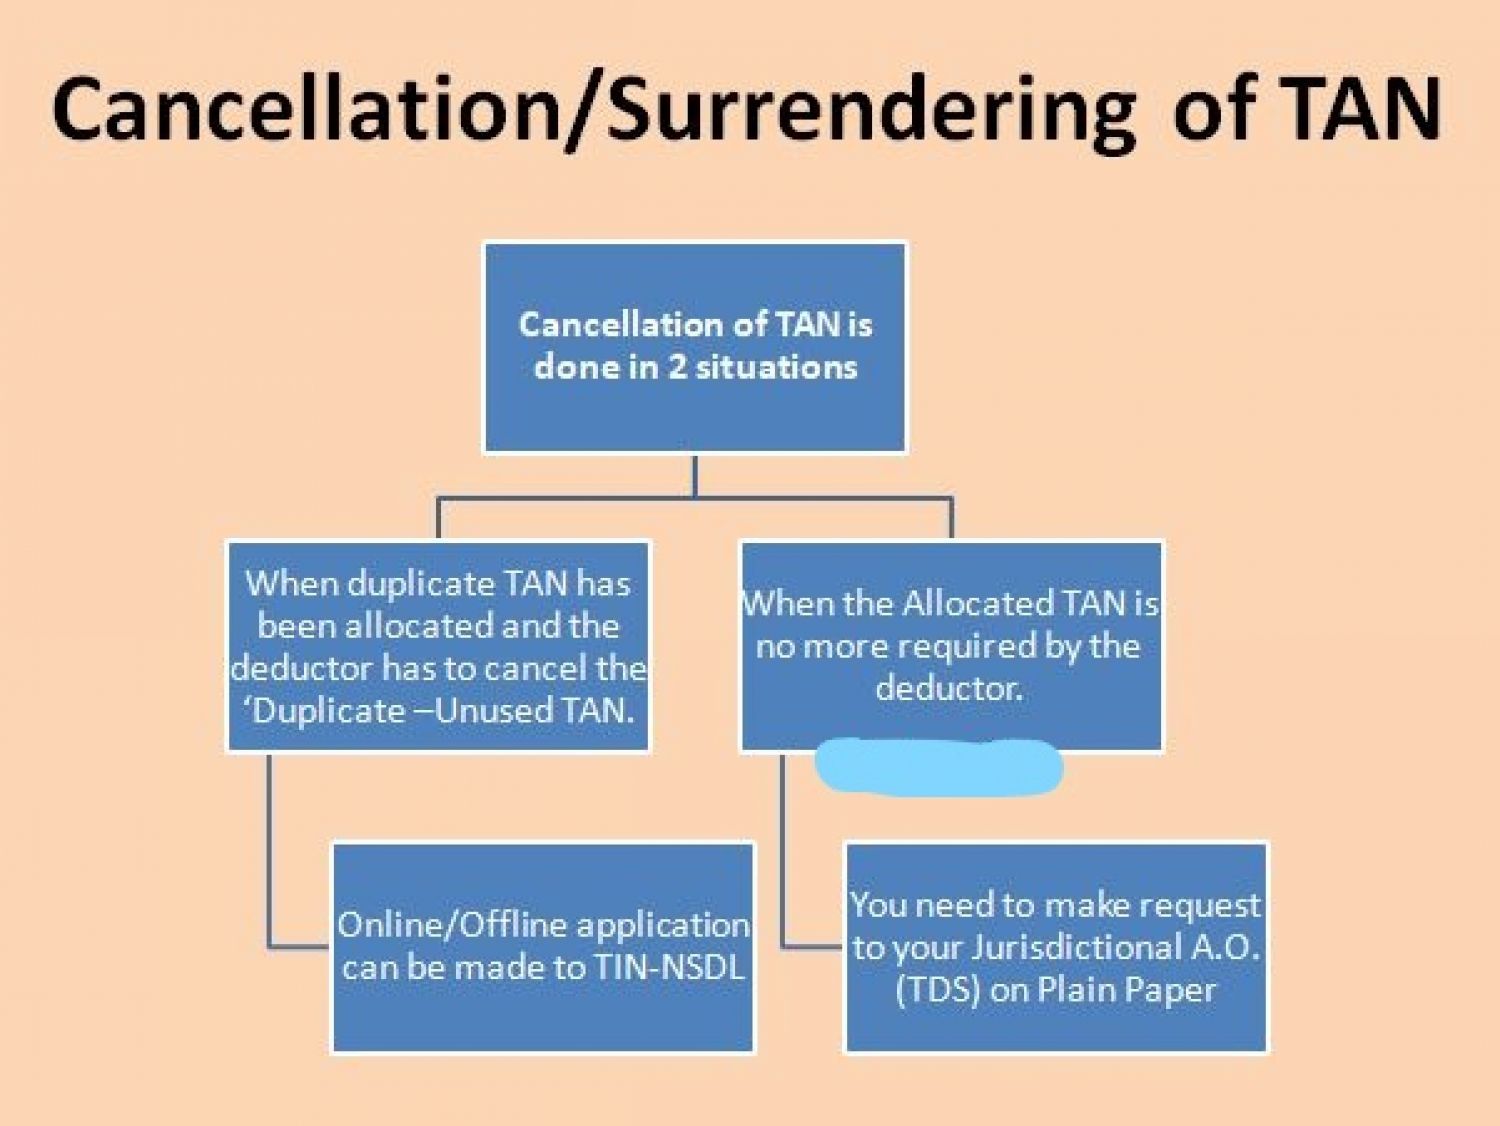 Process of Cancellation / Surrendering of multiple TANs Allotted